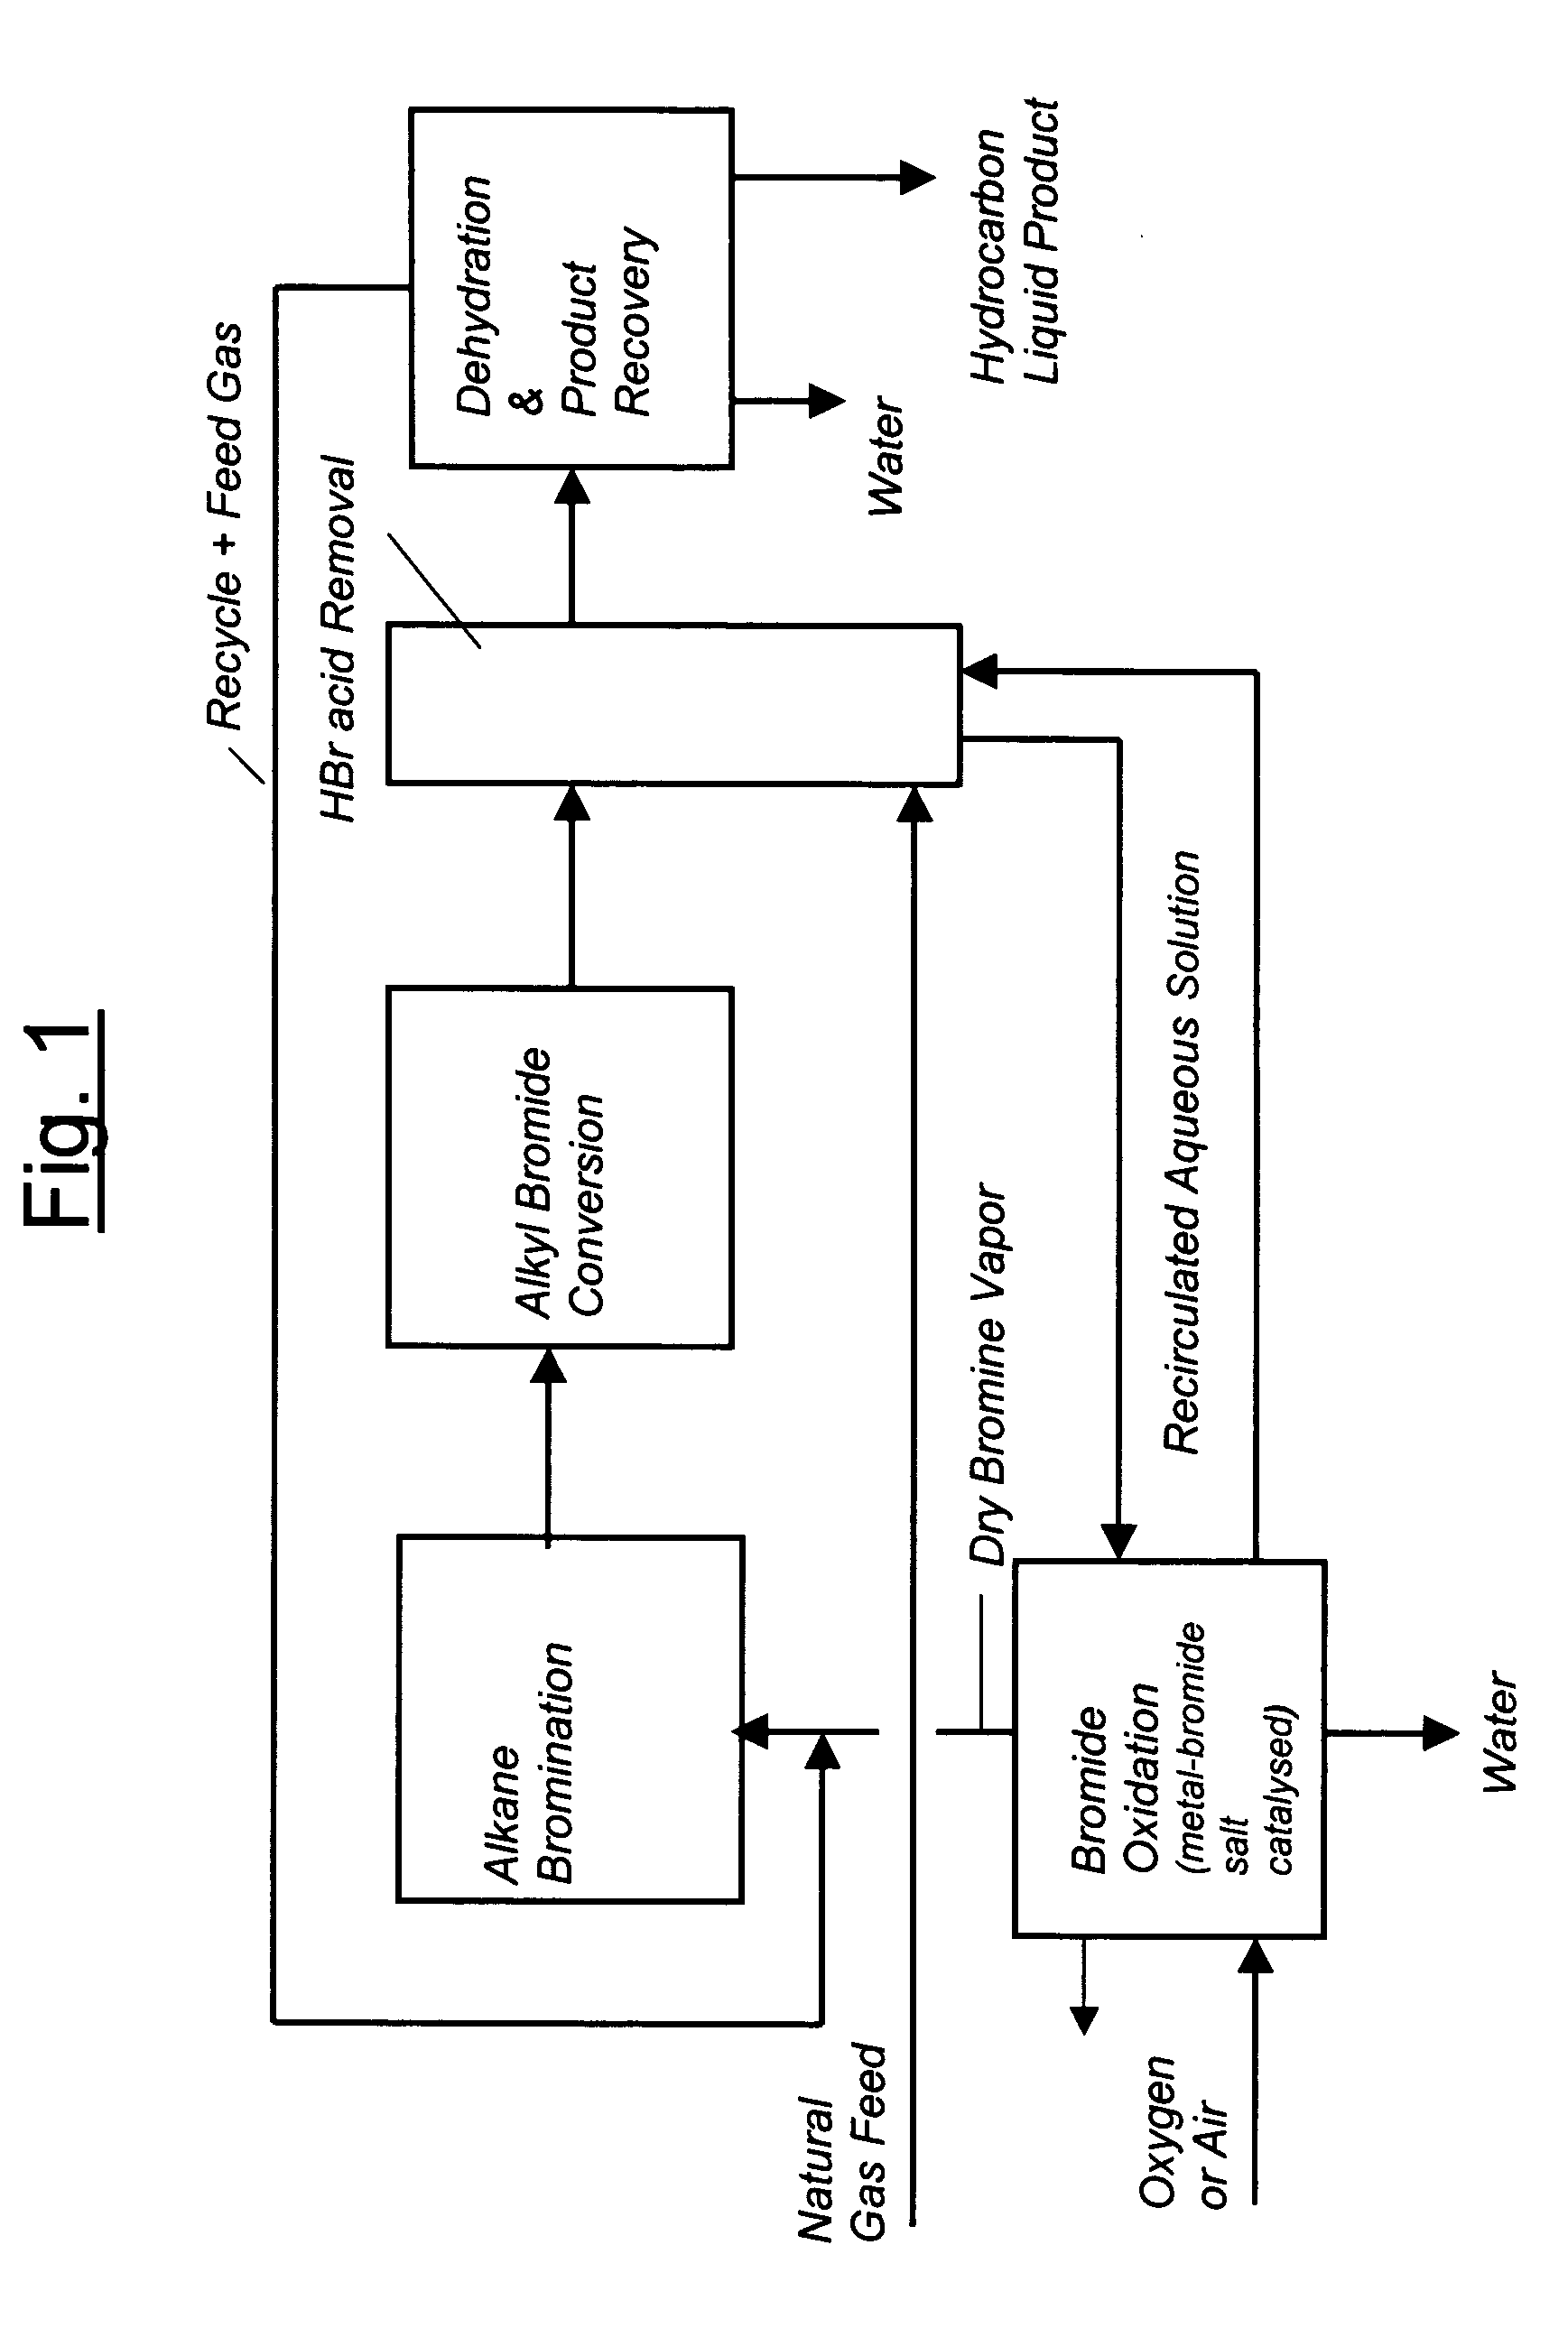 Process for converting gaseous alkanes to liquid hydrocarbons